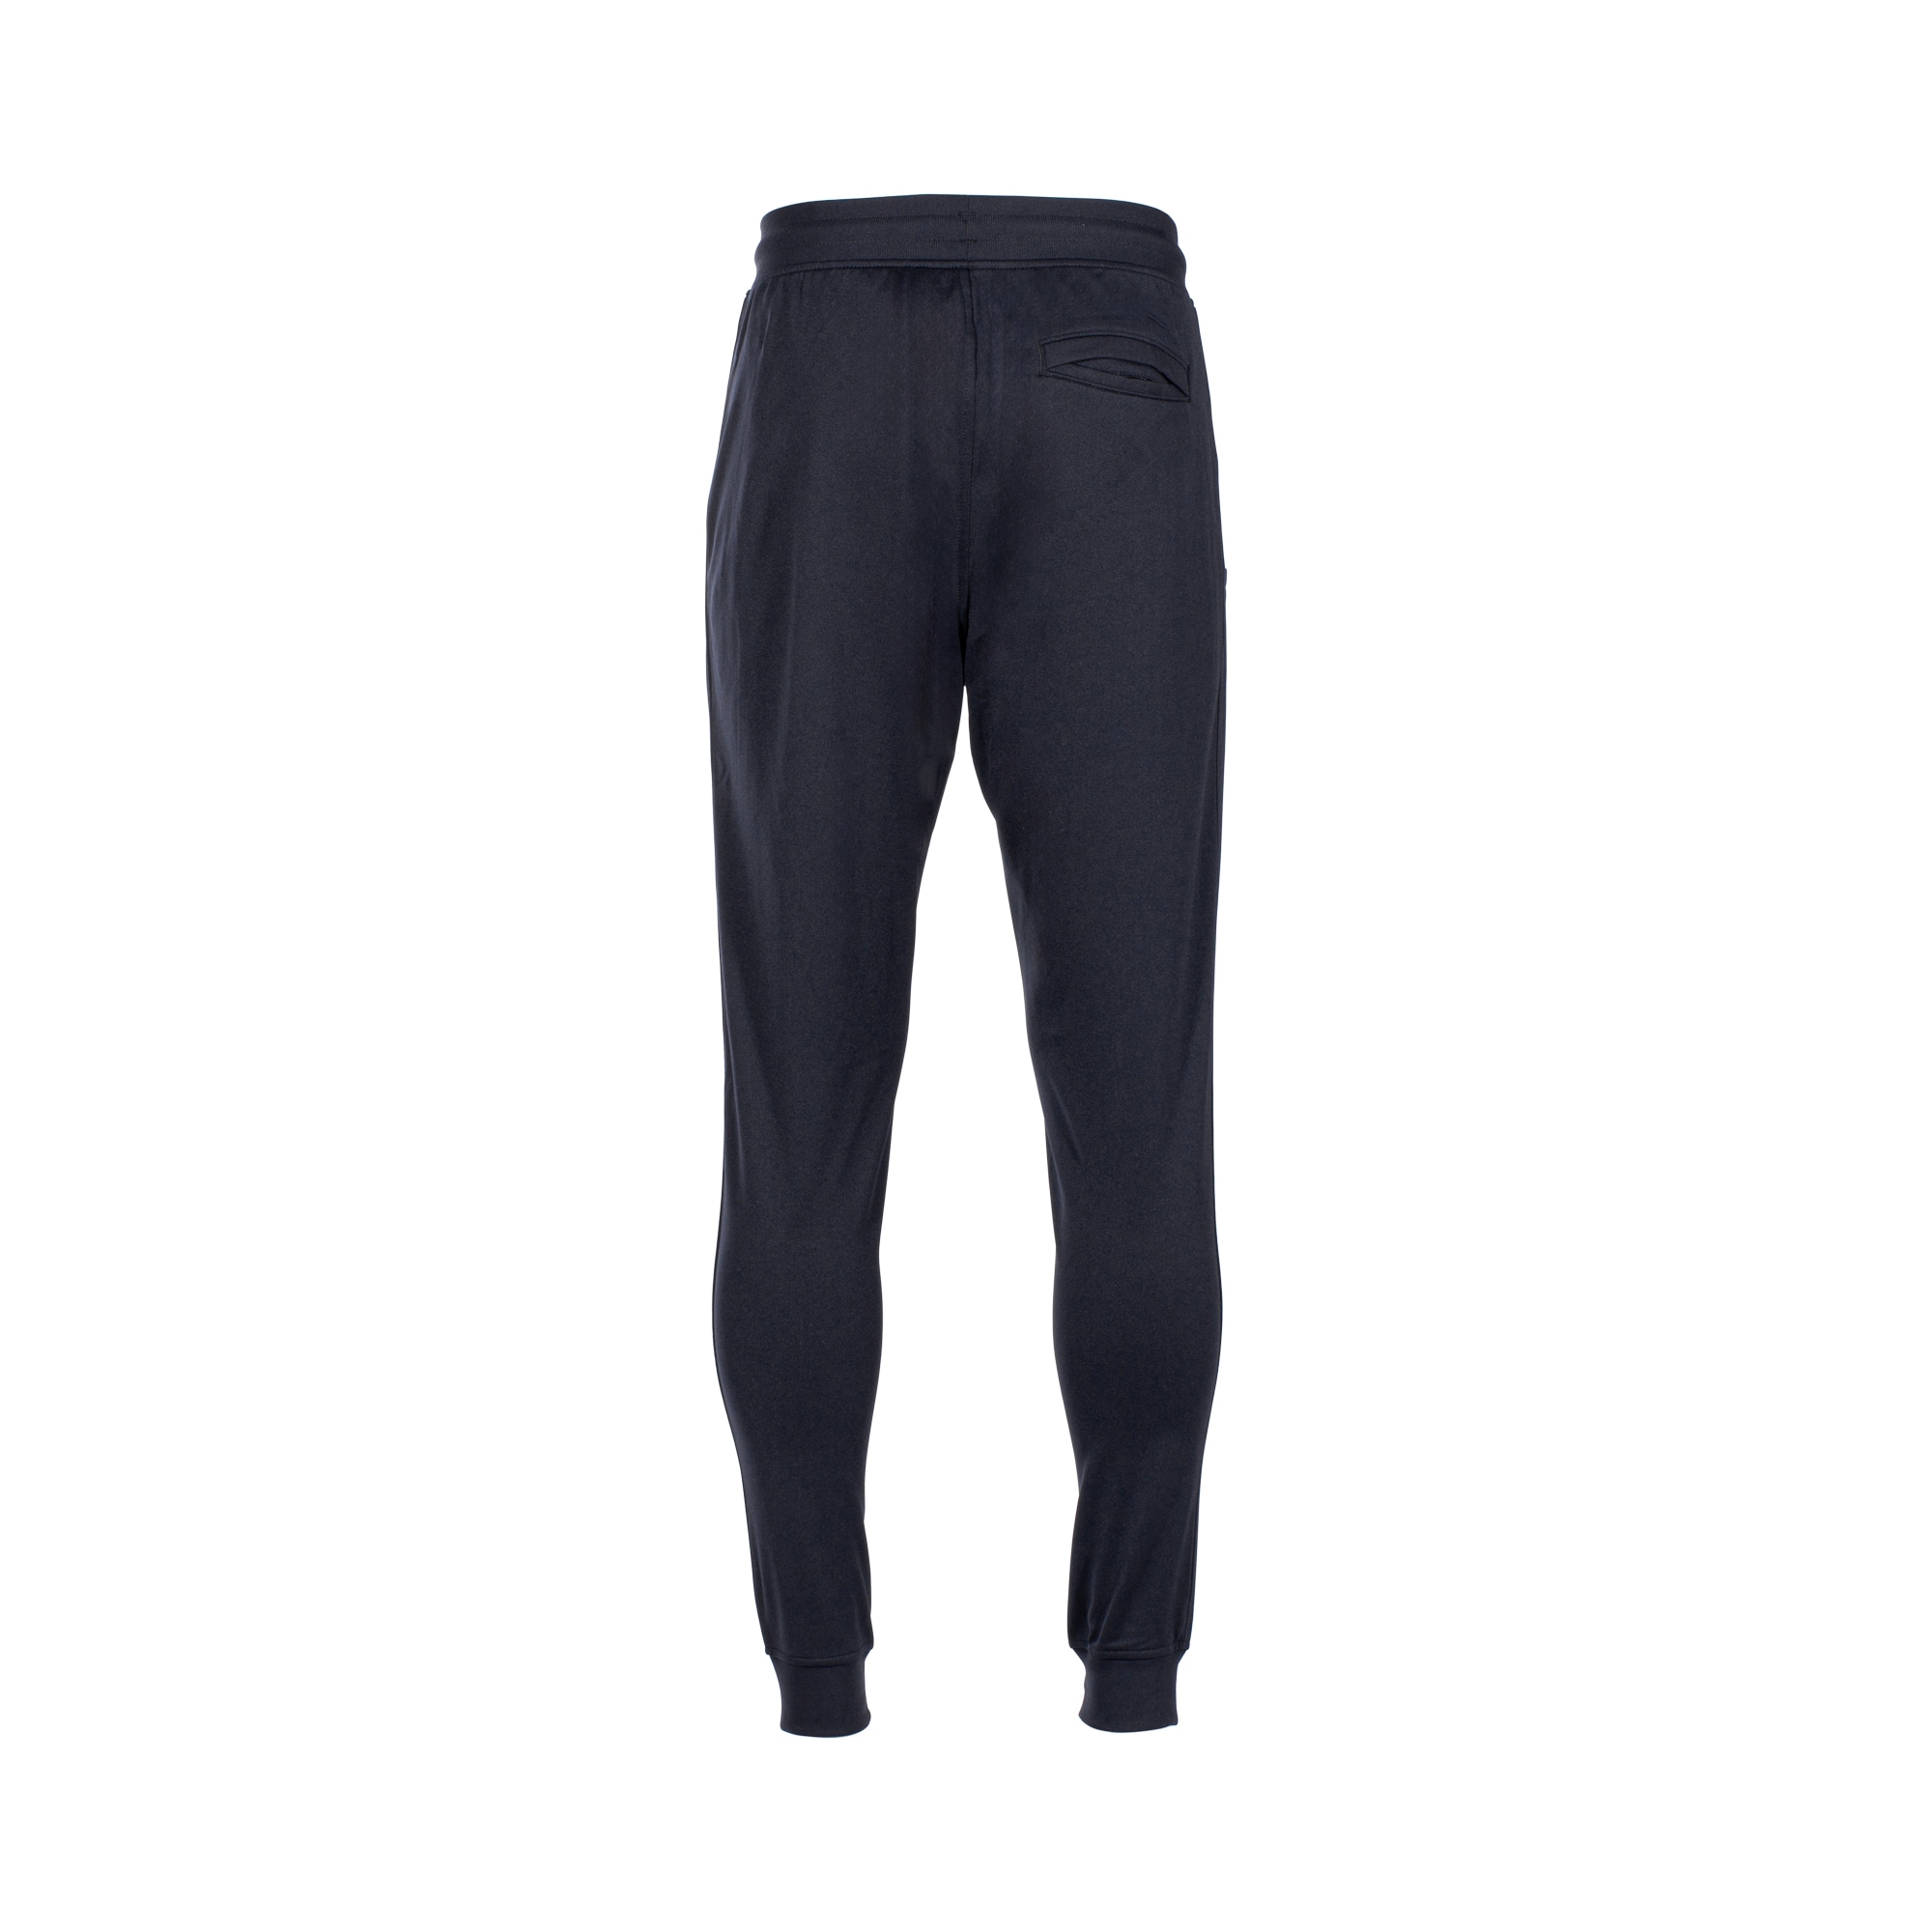 Under Armour Fitness Pants Sportstyle Jogger black/white